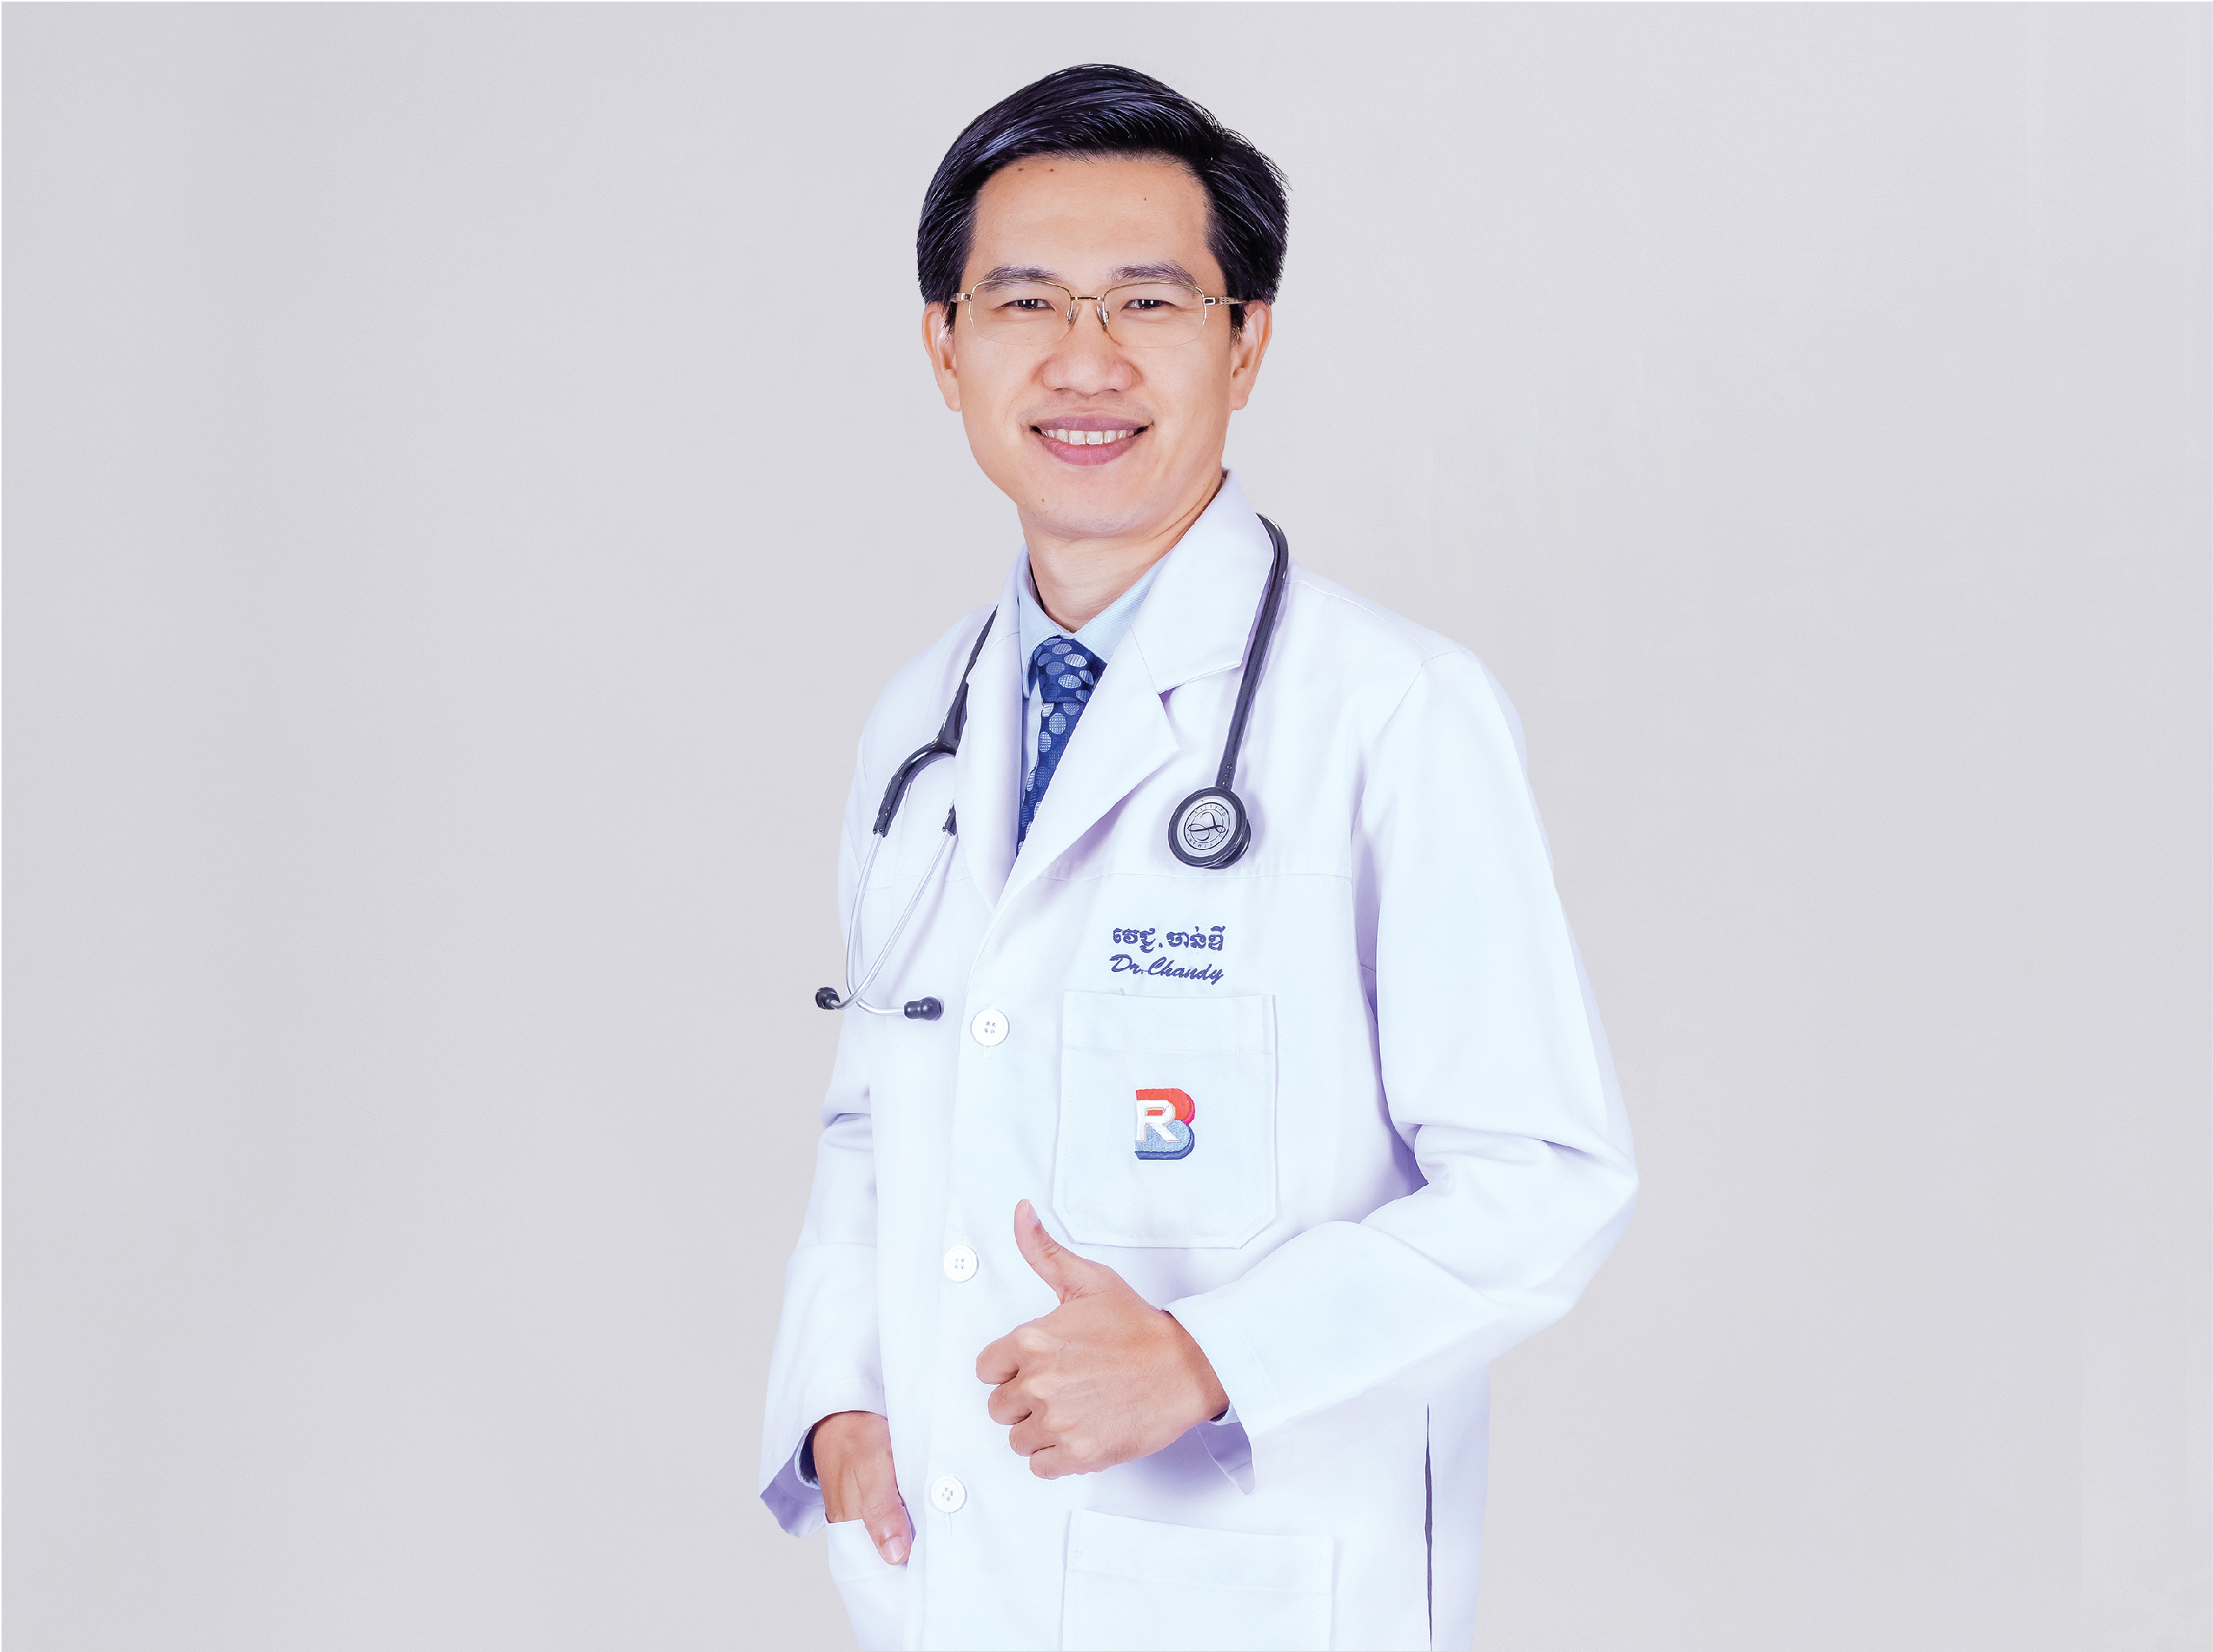 Dr. Chea Chandy